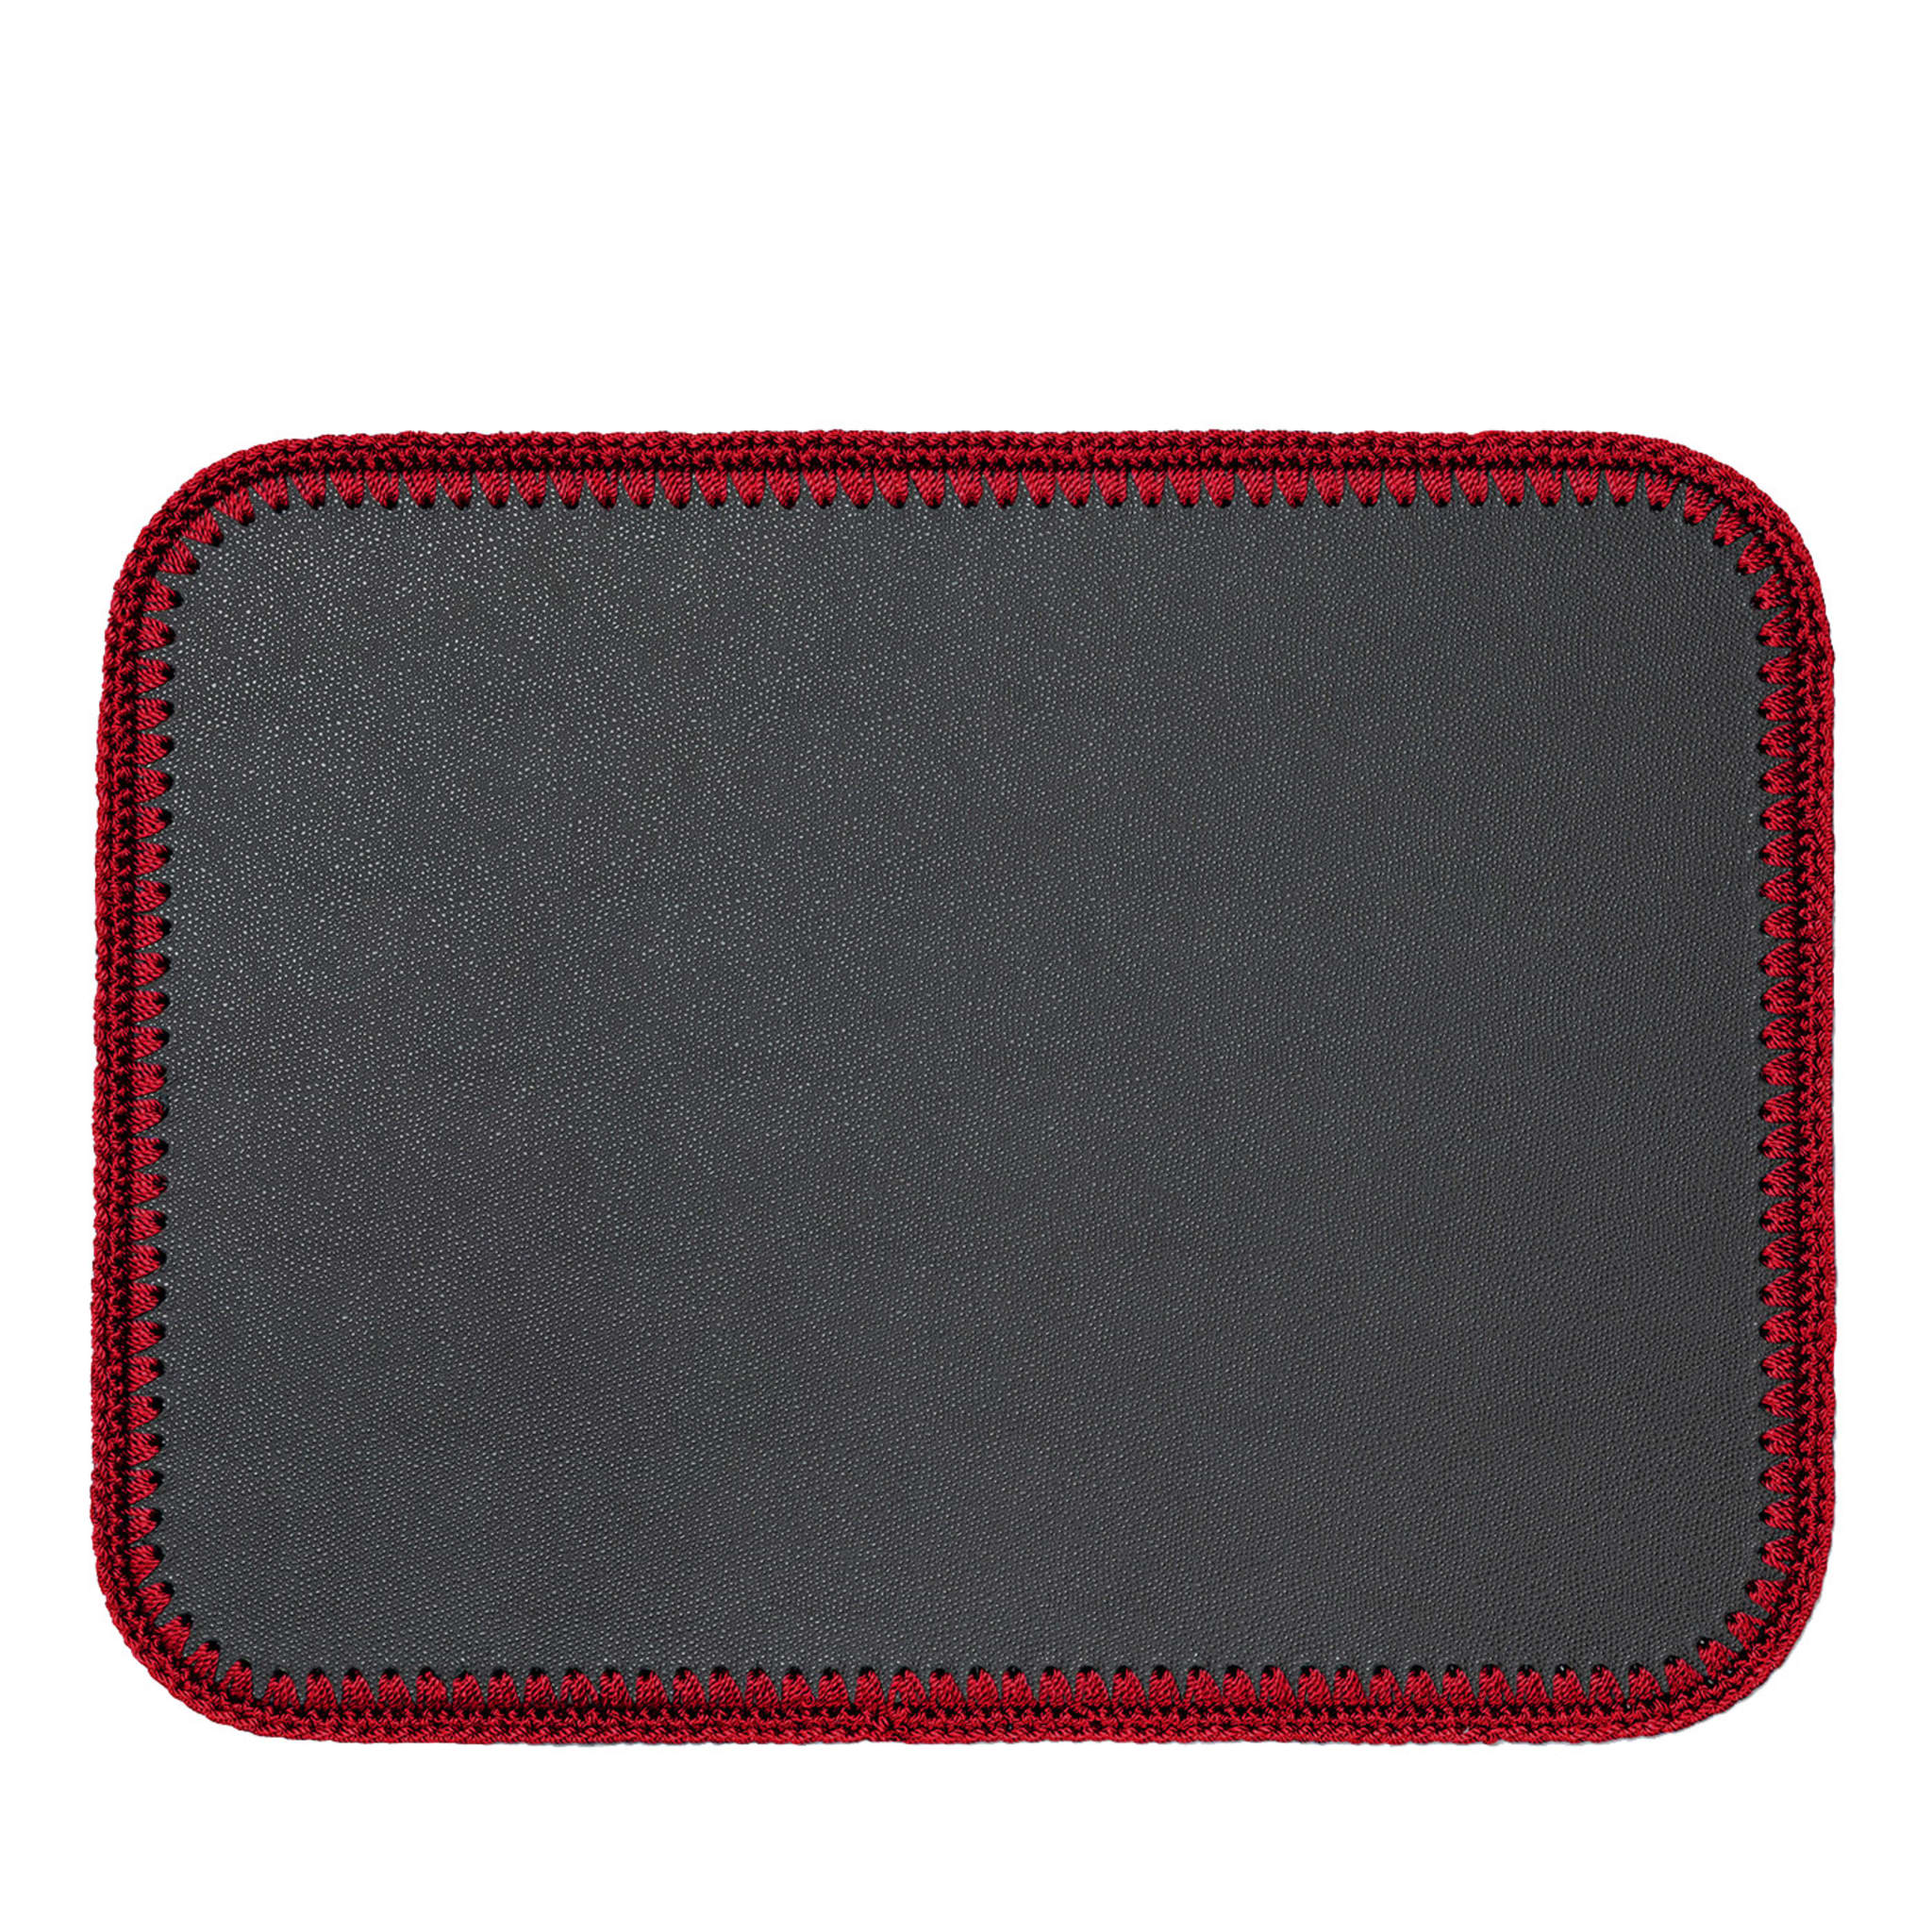 Rochelle Leather & Crochet Placemats Rectangular - Red - Main view